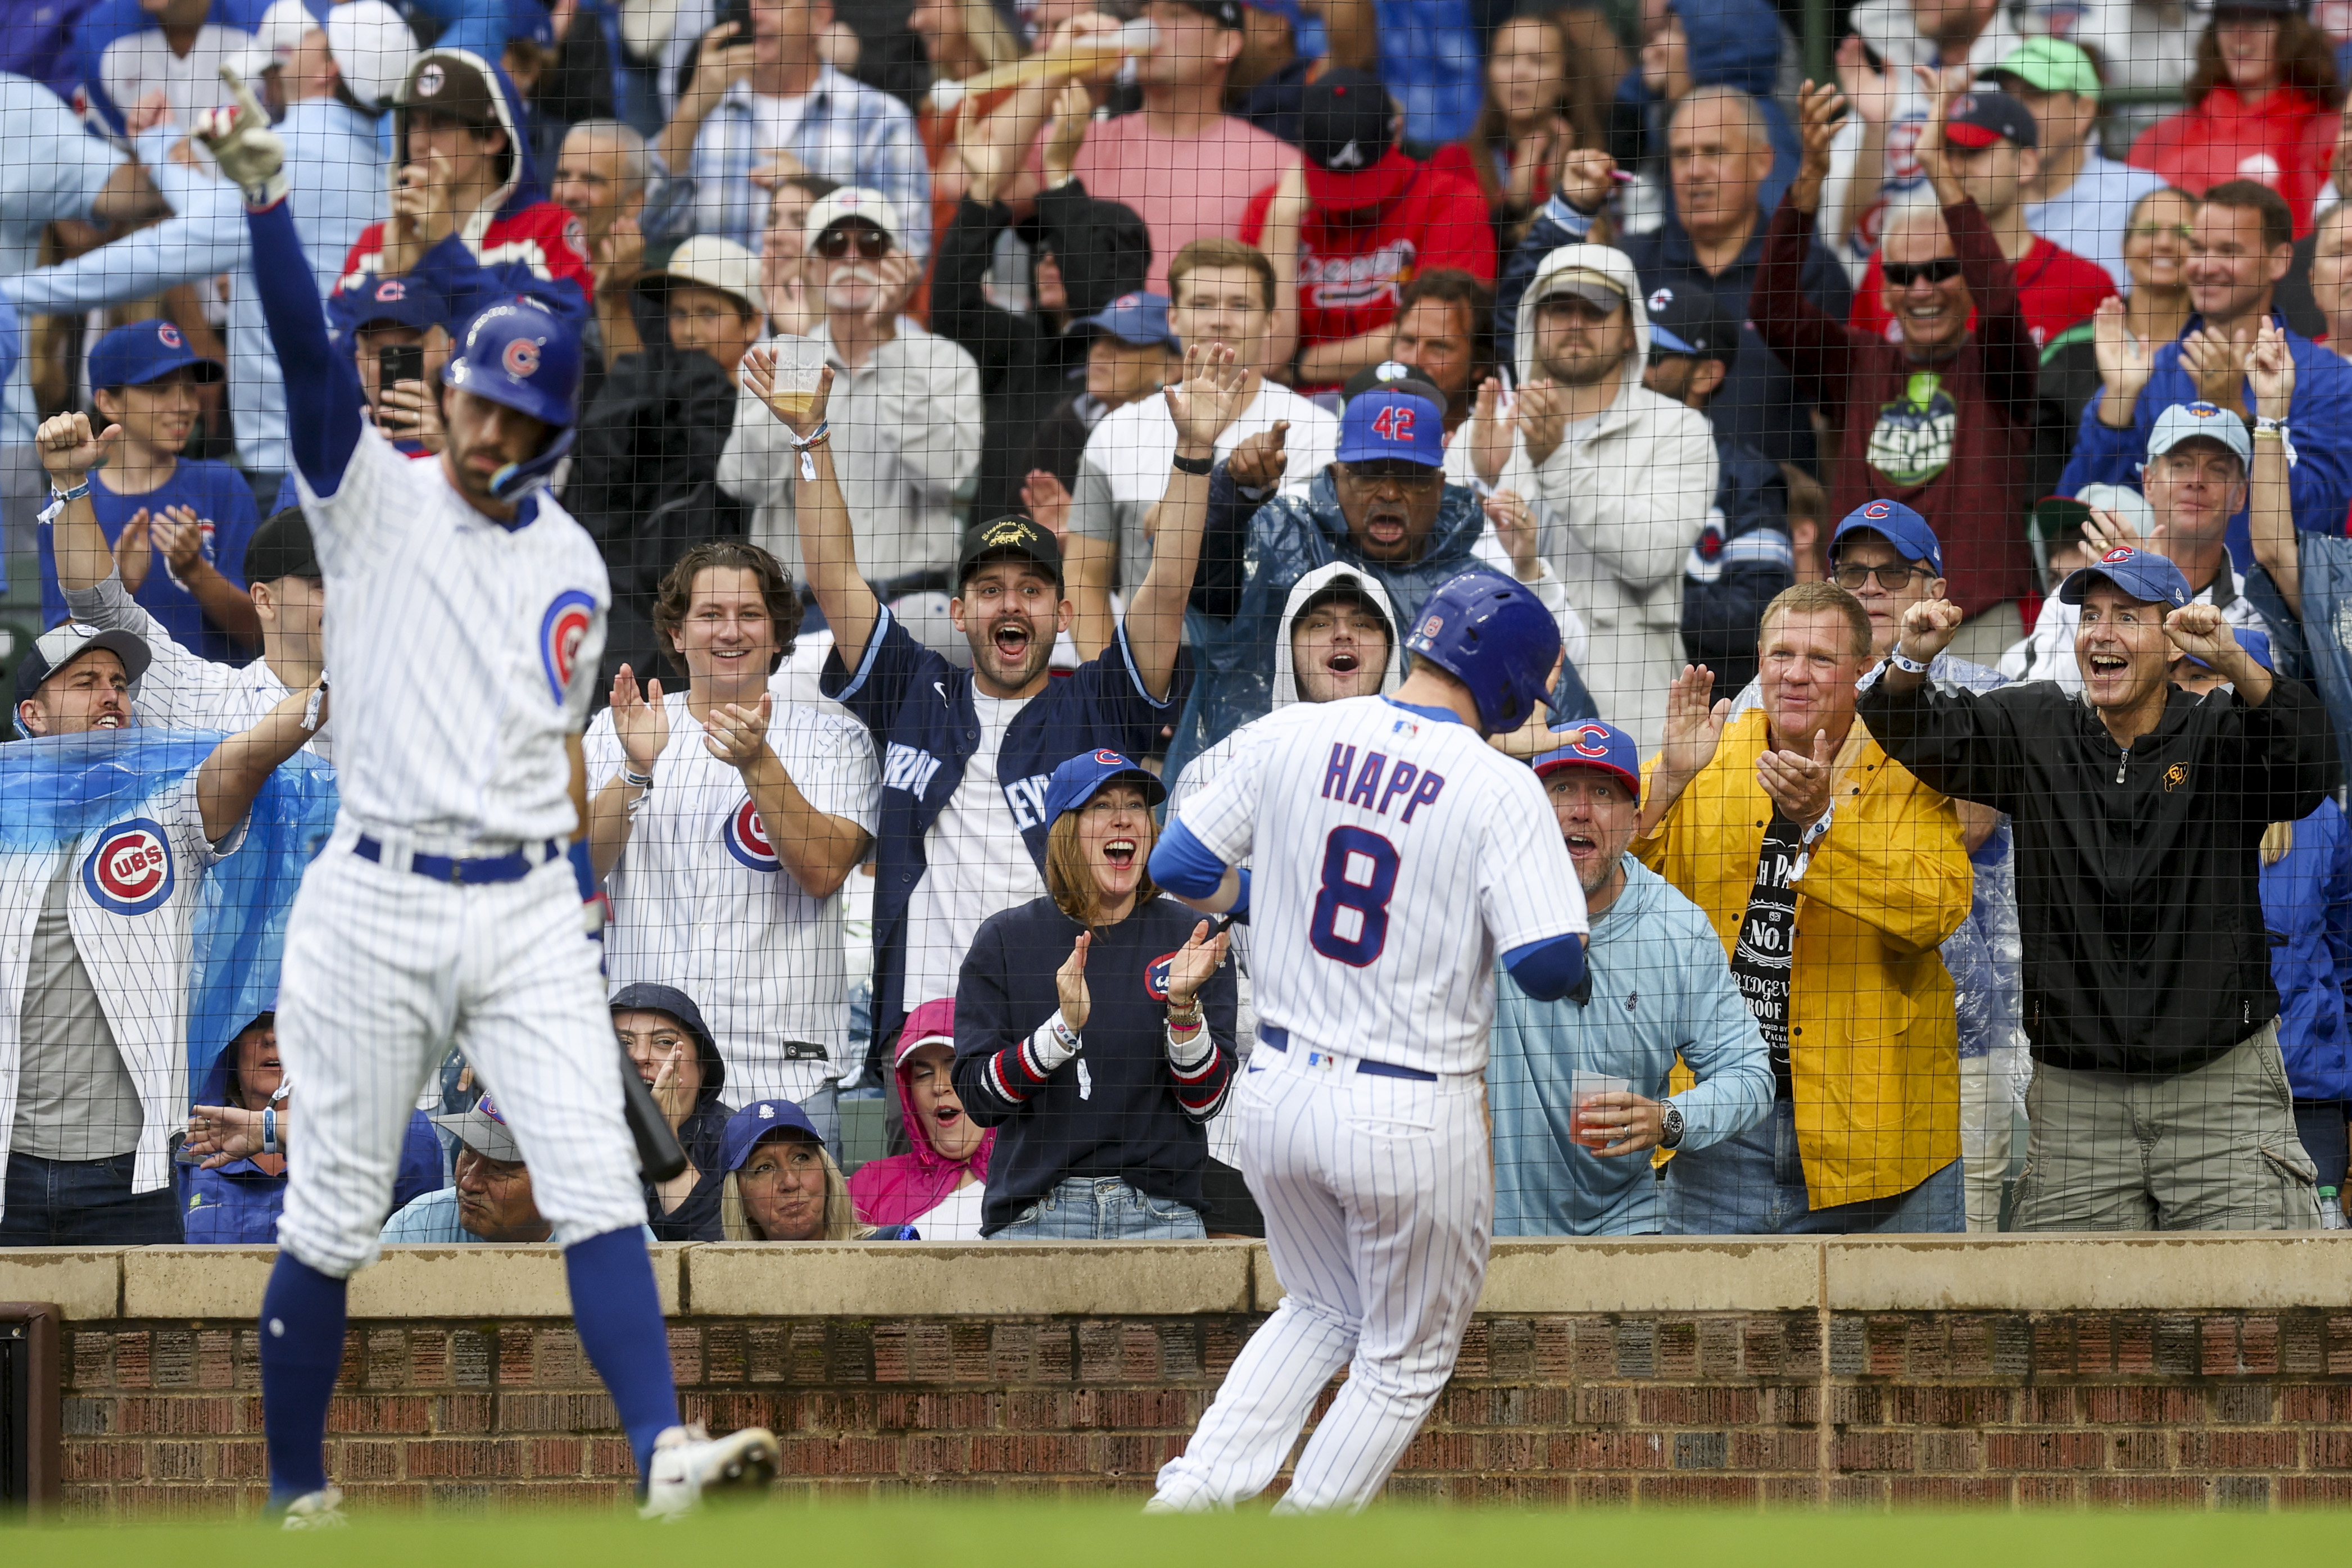 Chicago baseball: What's new, what's ahead for Cubs, White Sox